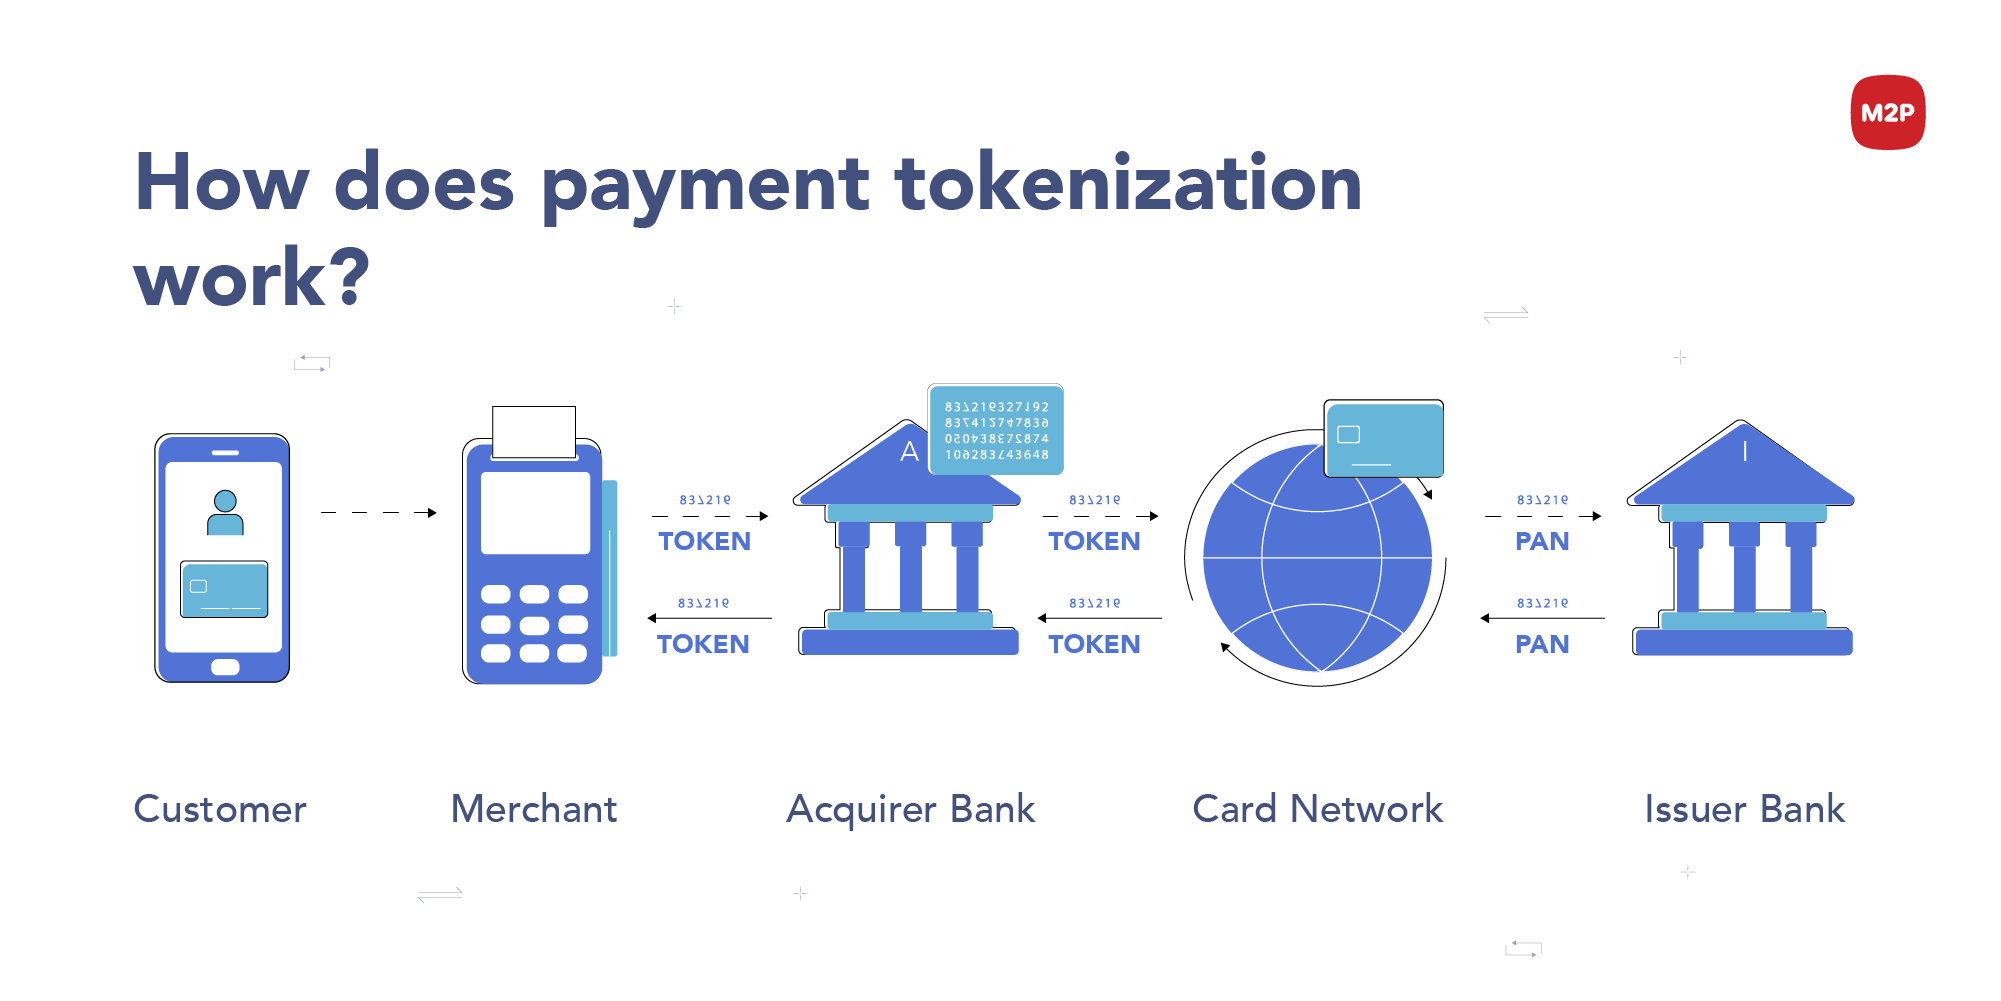 What is a token and what is it for?